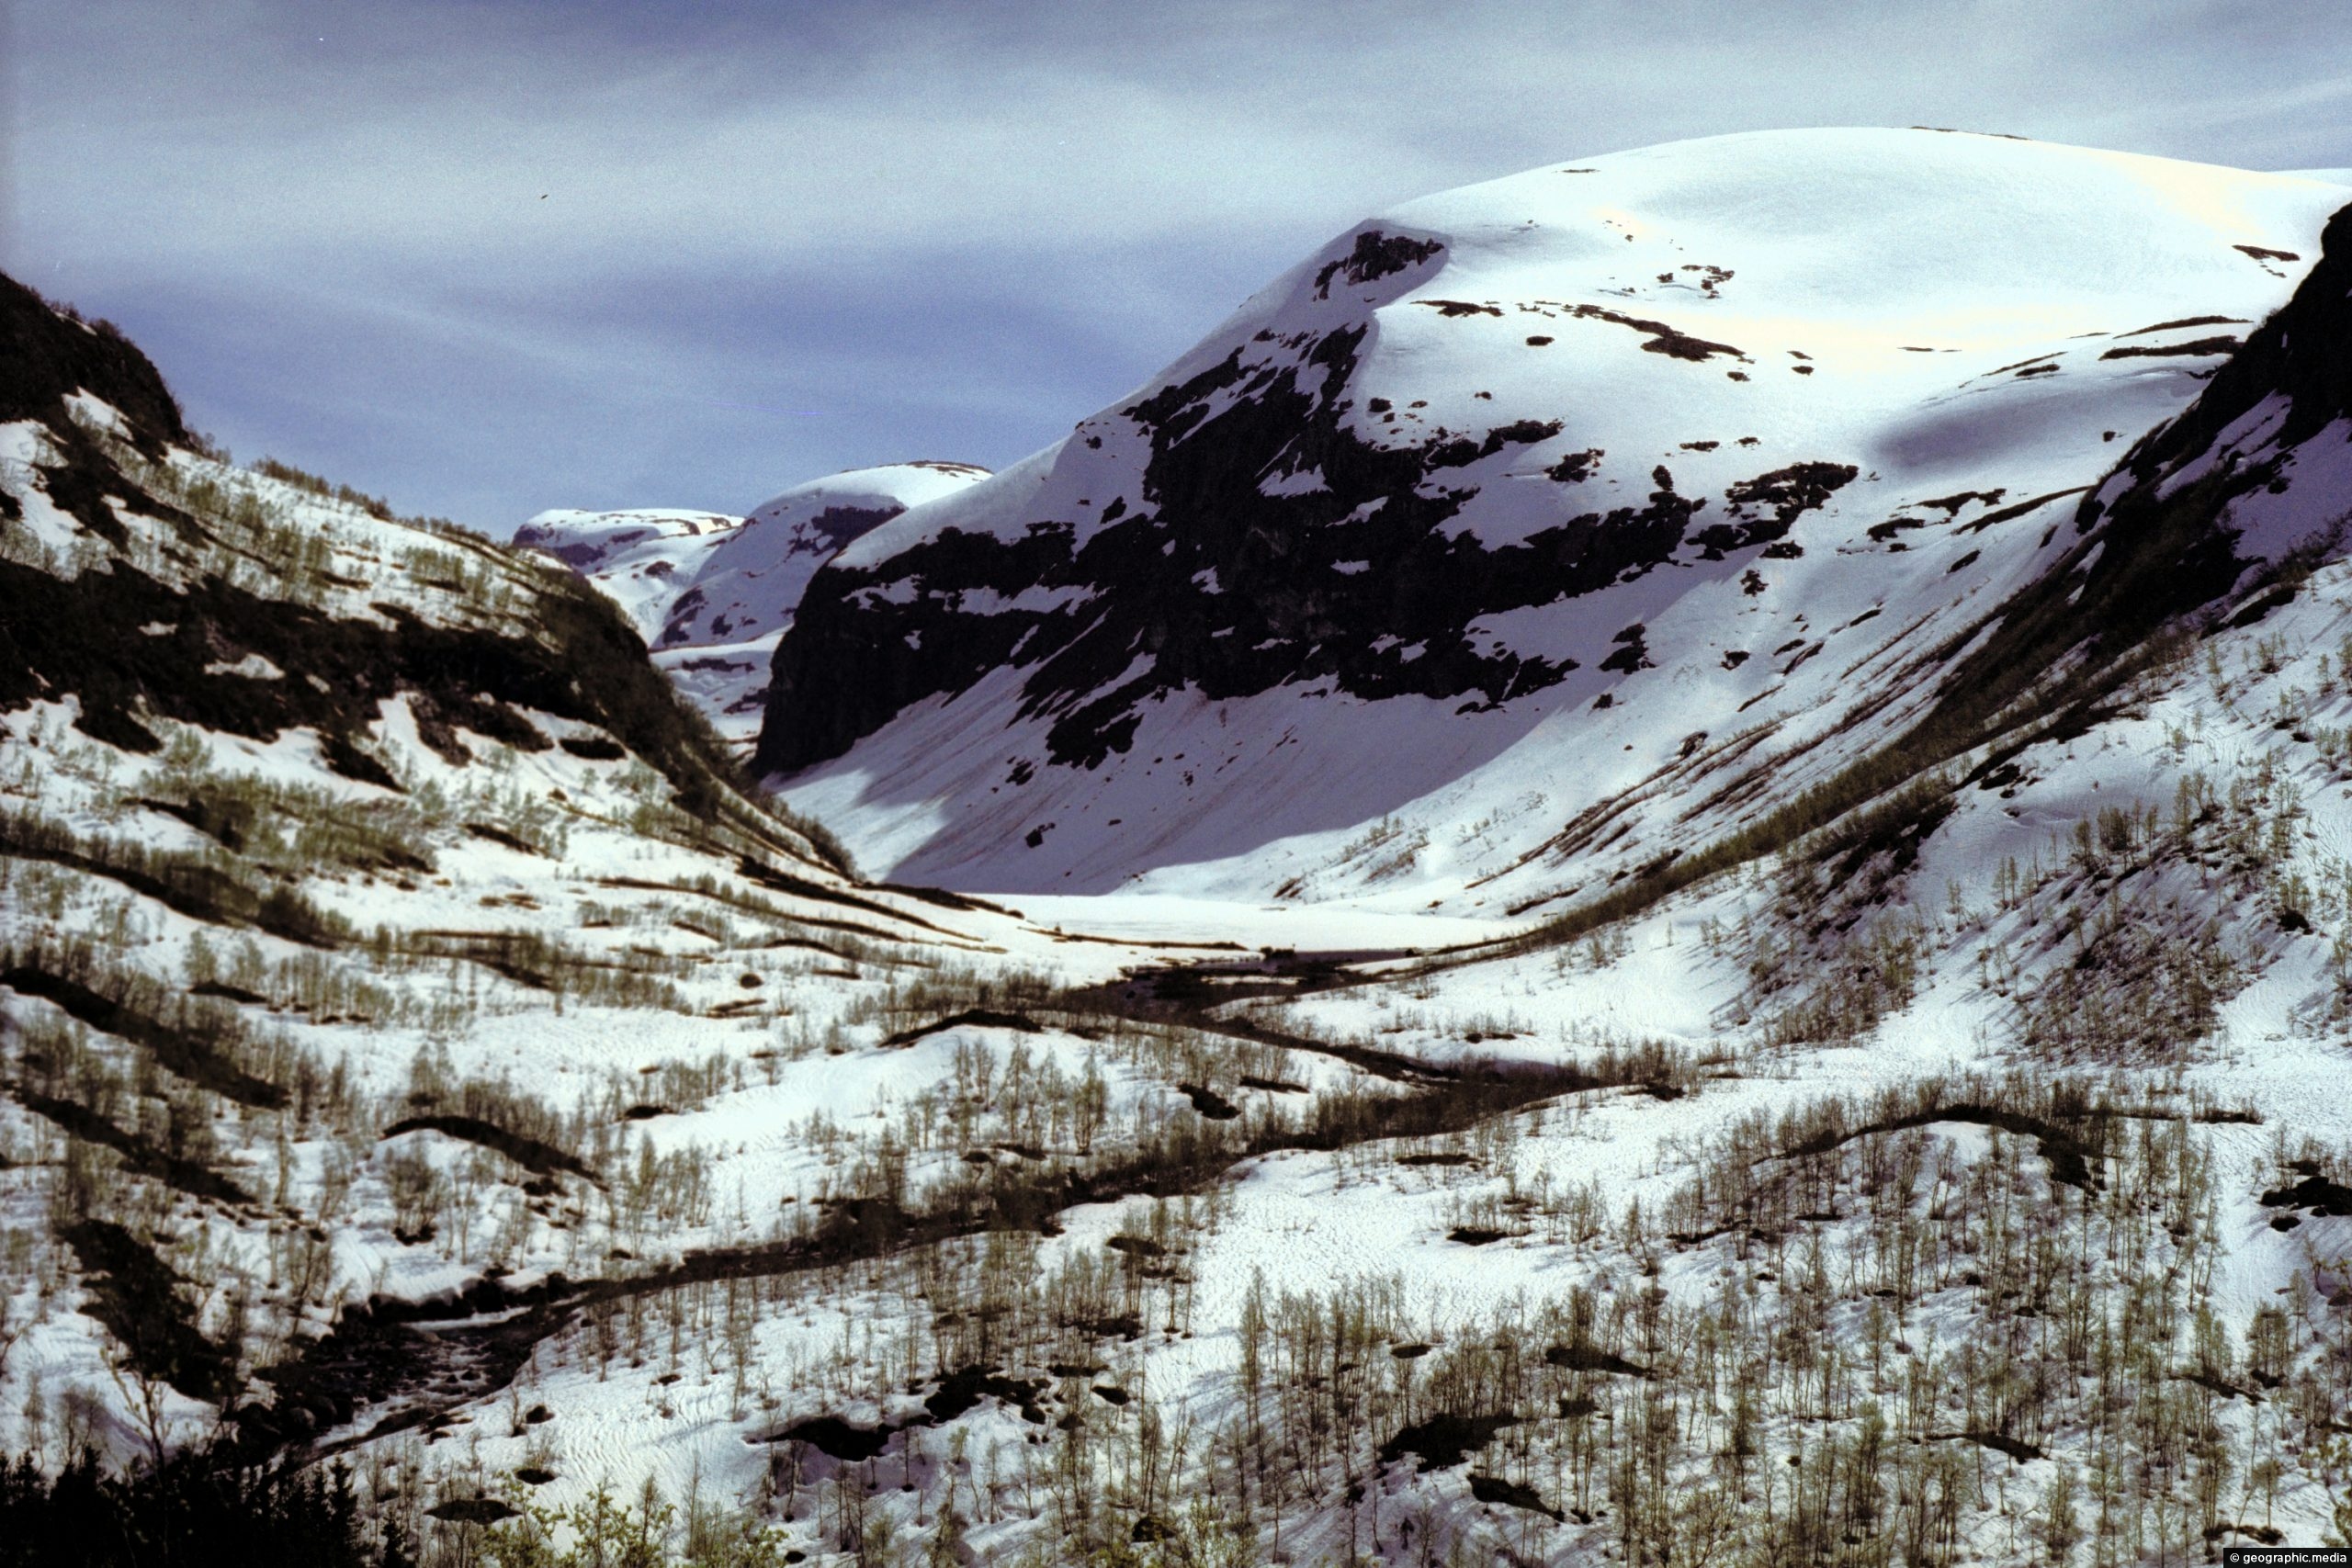 Mountains near Voss, Norway